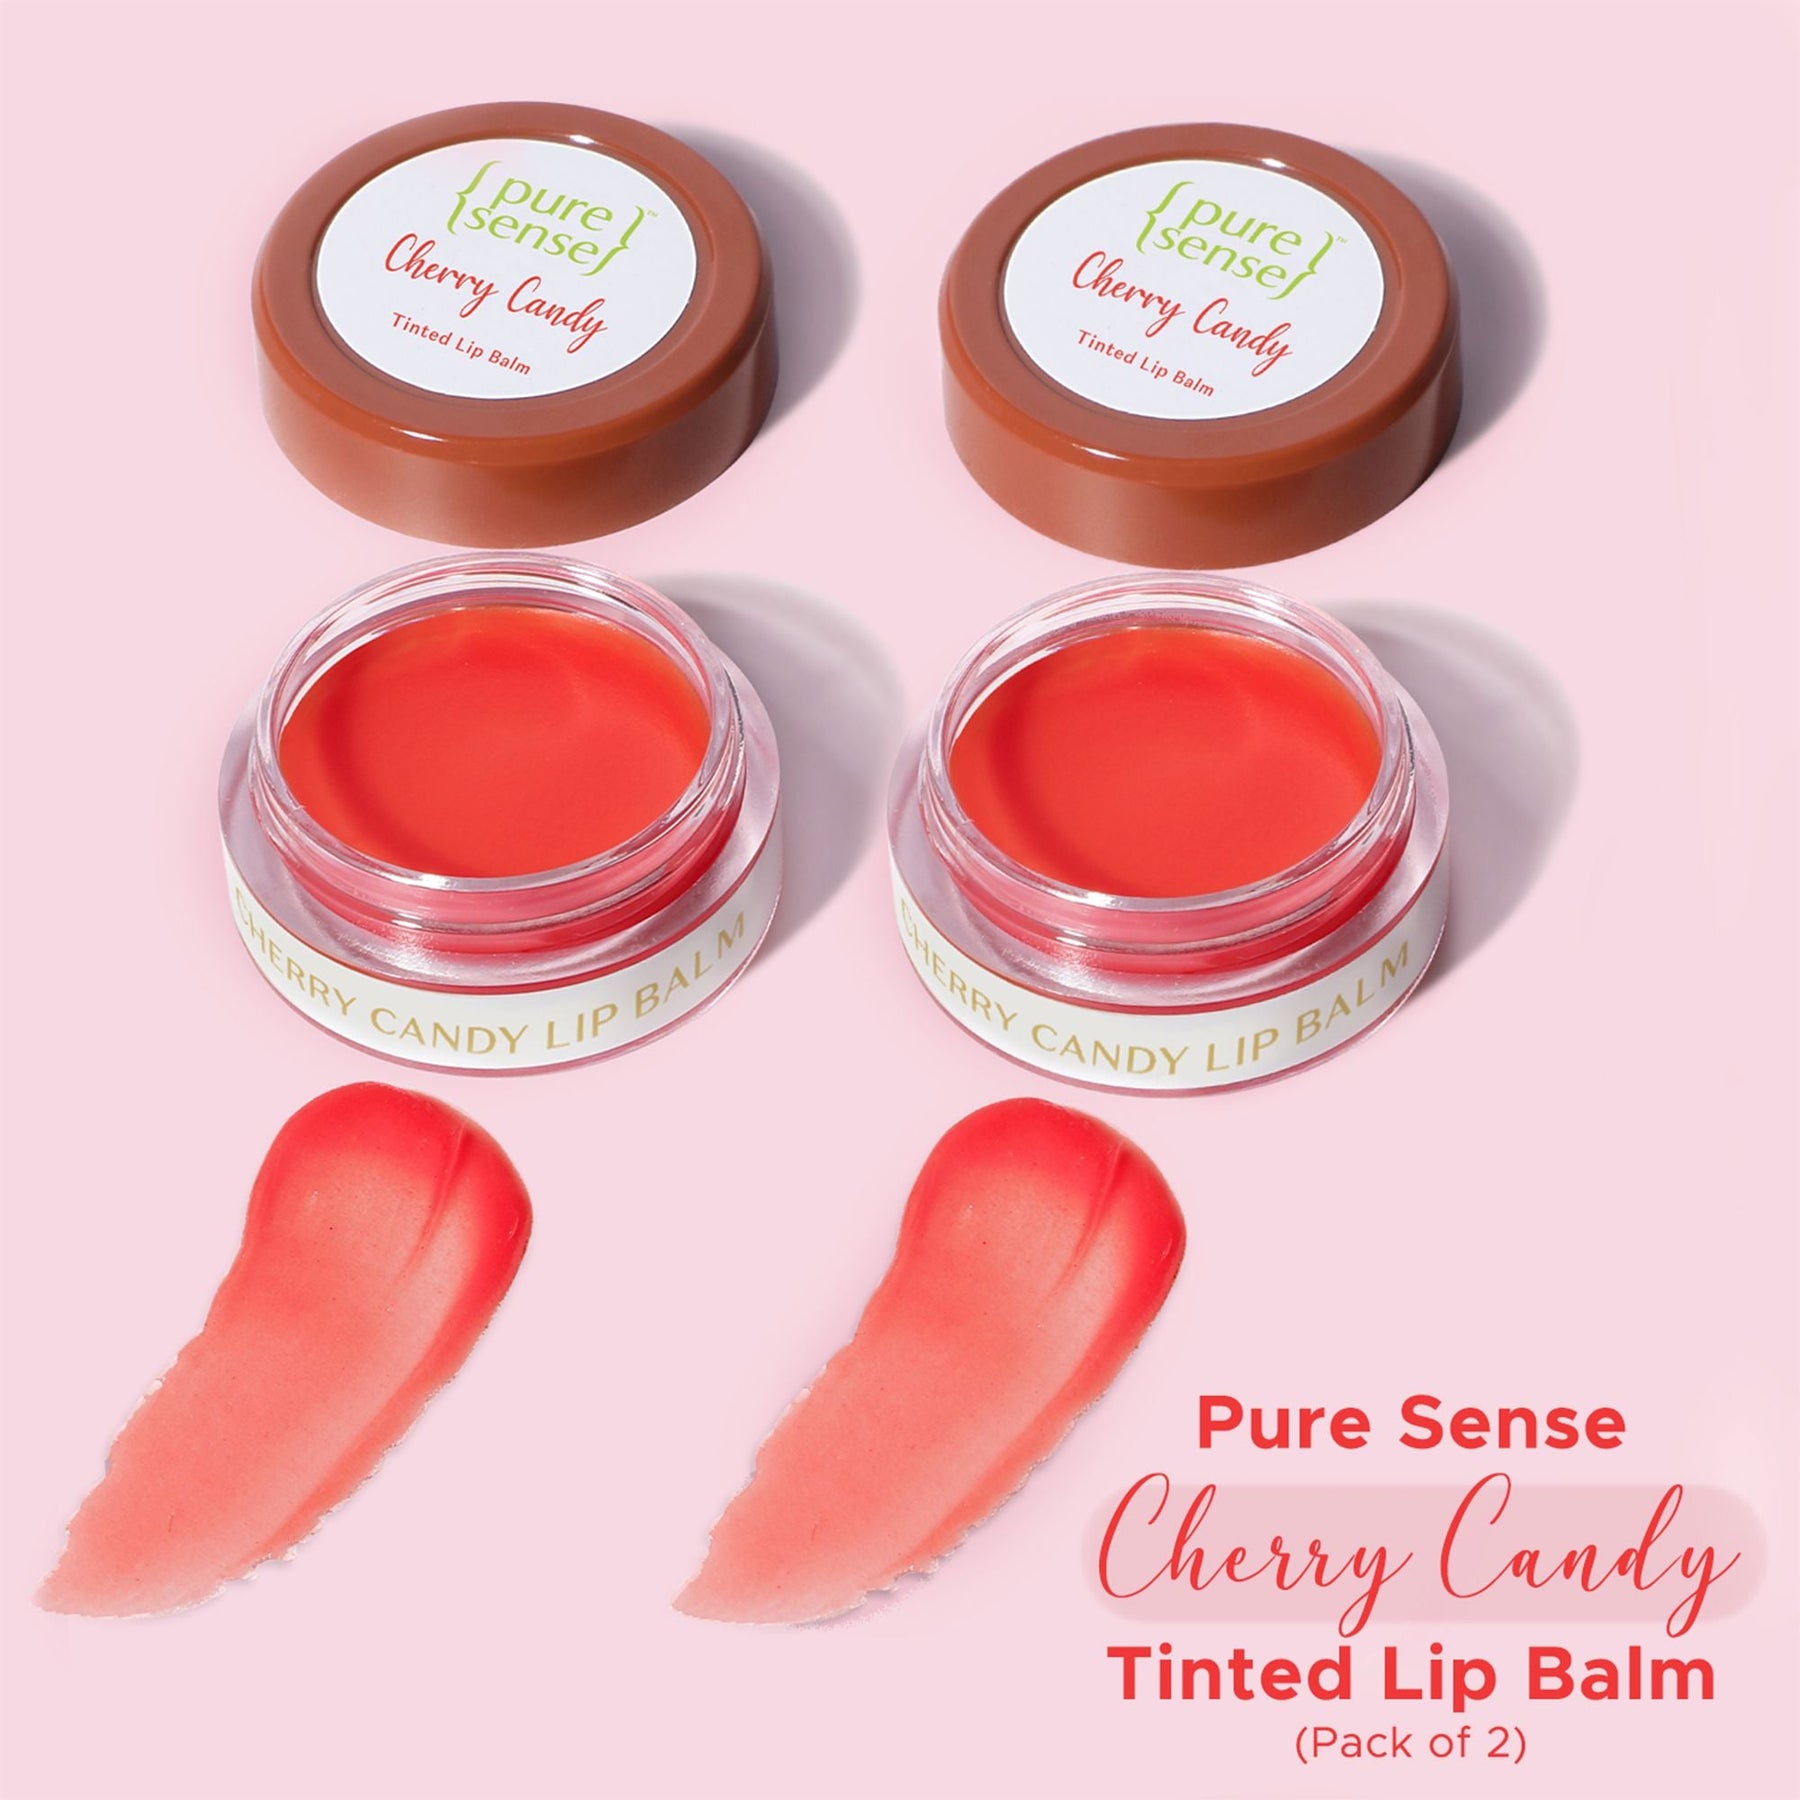 [CRED] Cherry Candy Tinted Lip Balm combo - Pack of 2 |  From the makers of Parachute Advansed | 10 ml